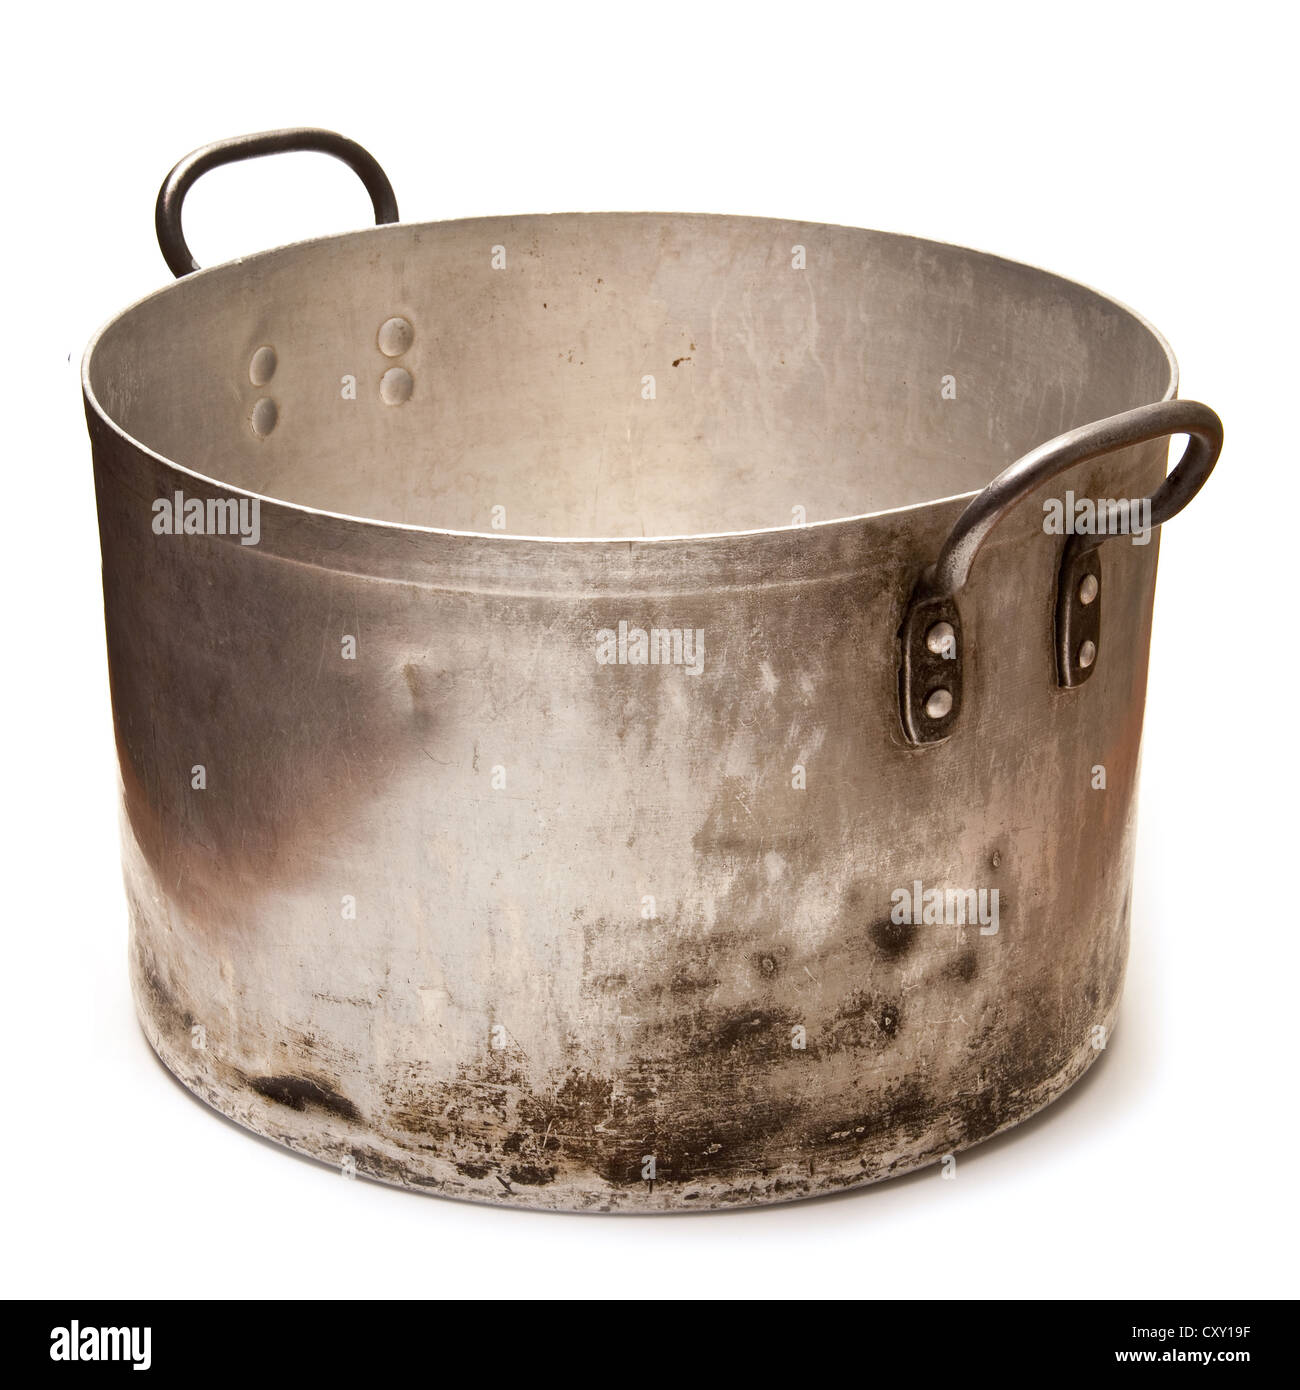 https://c8.alamy.com/comp/CXY19F/large-metal-saucepan-cooking-pot-isolated-on-a-white-studio-background-CXY19F.jpg